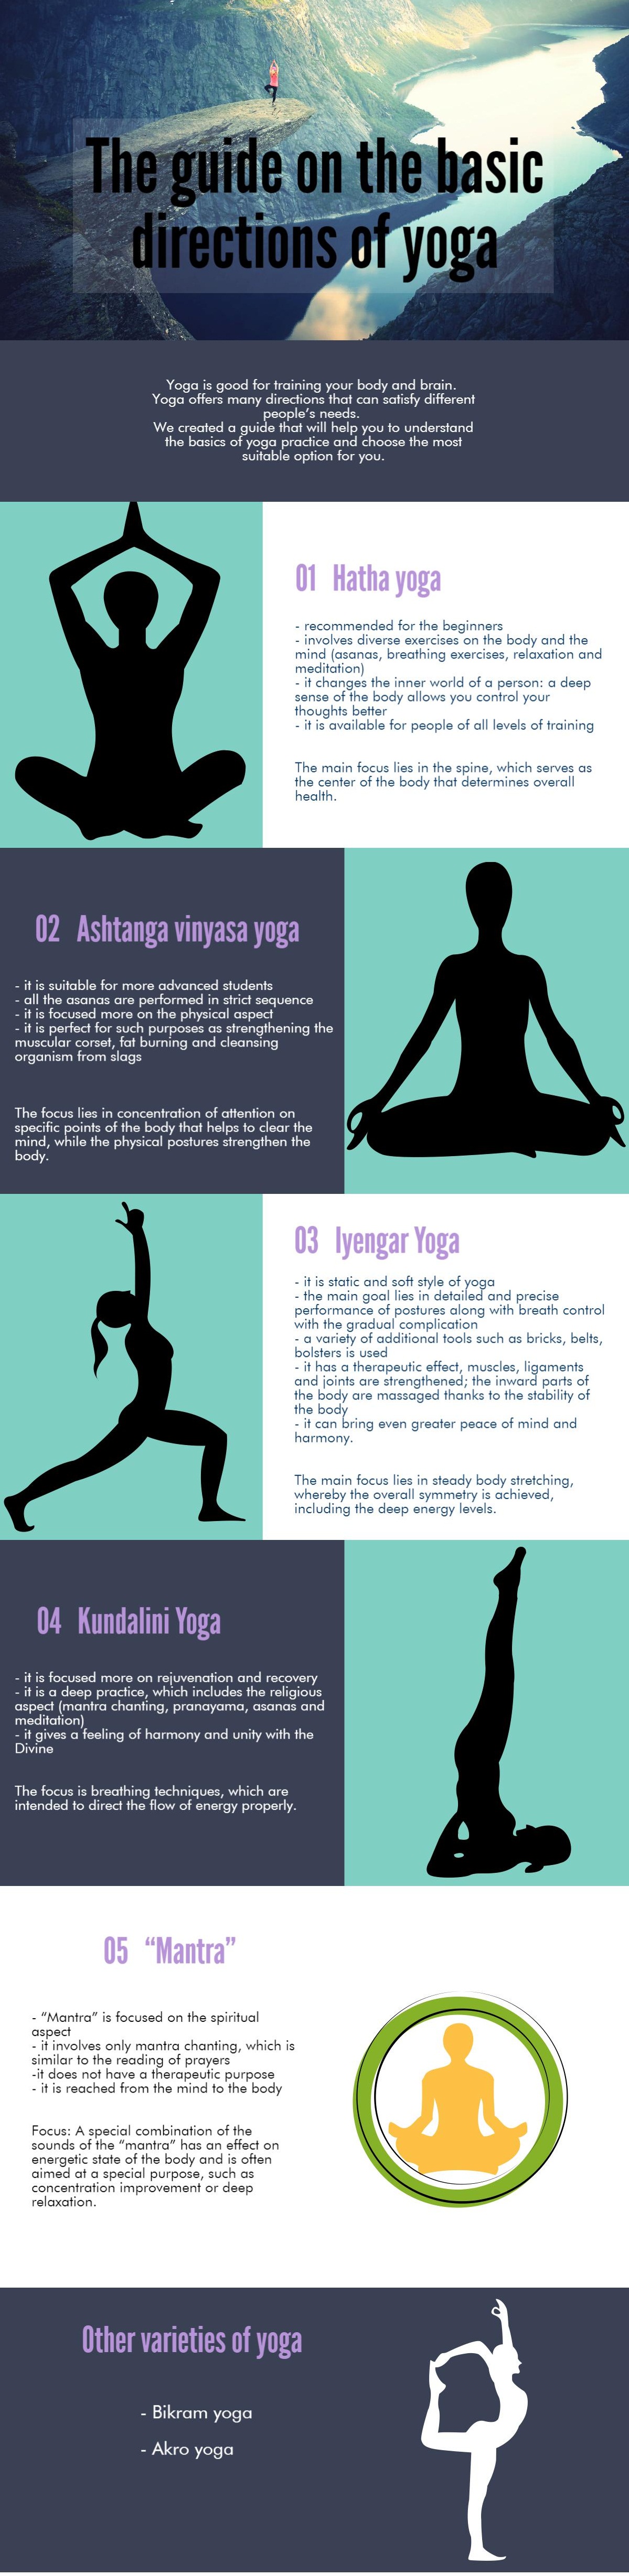 The Most Common Types of Yoga and How to Choose a Style